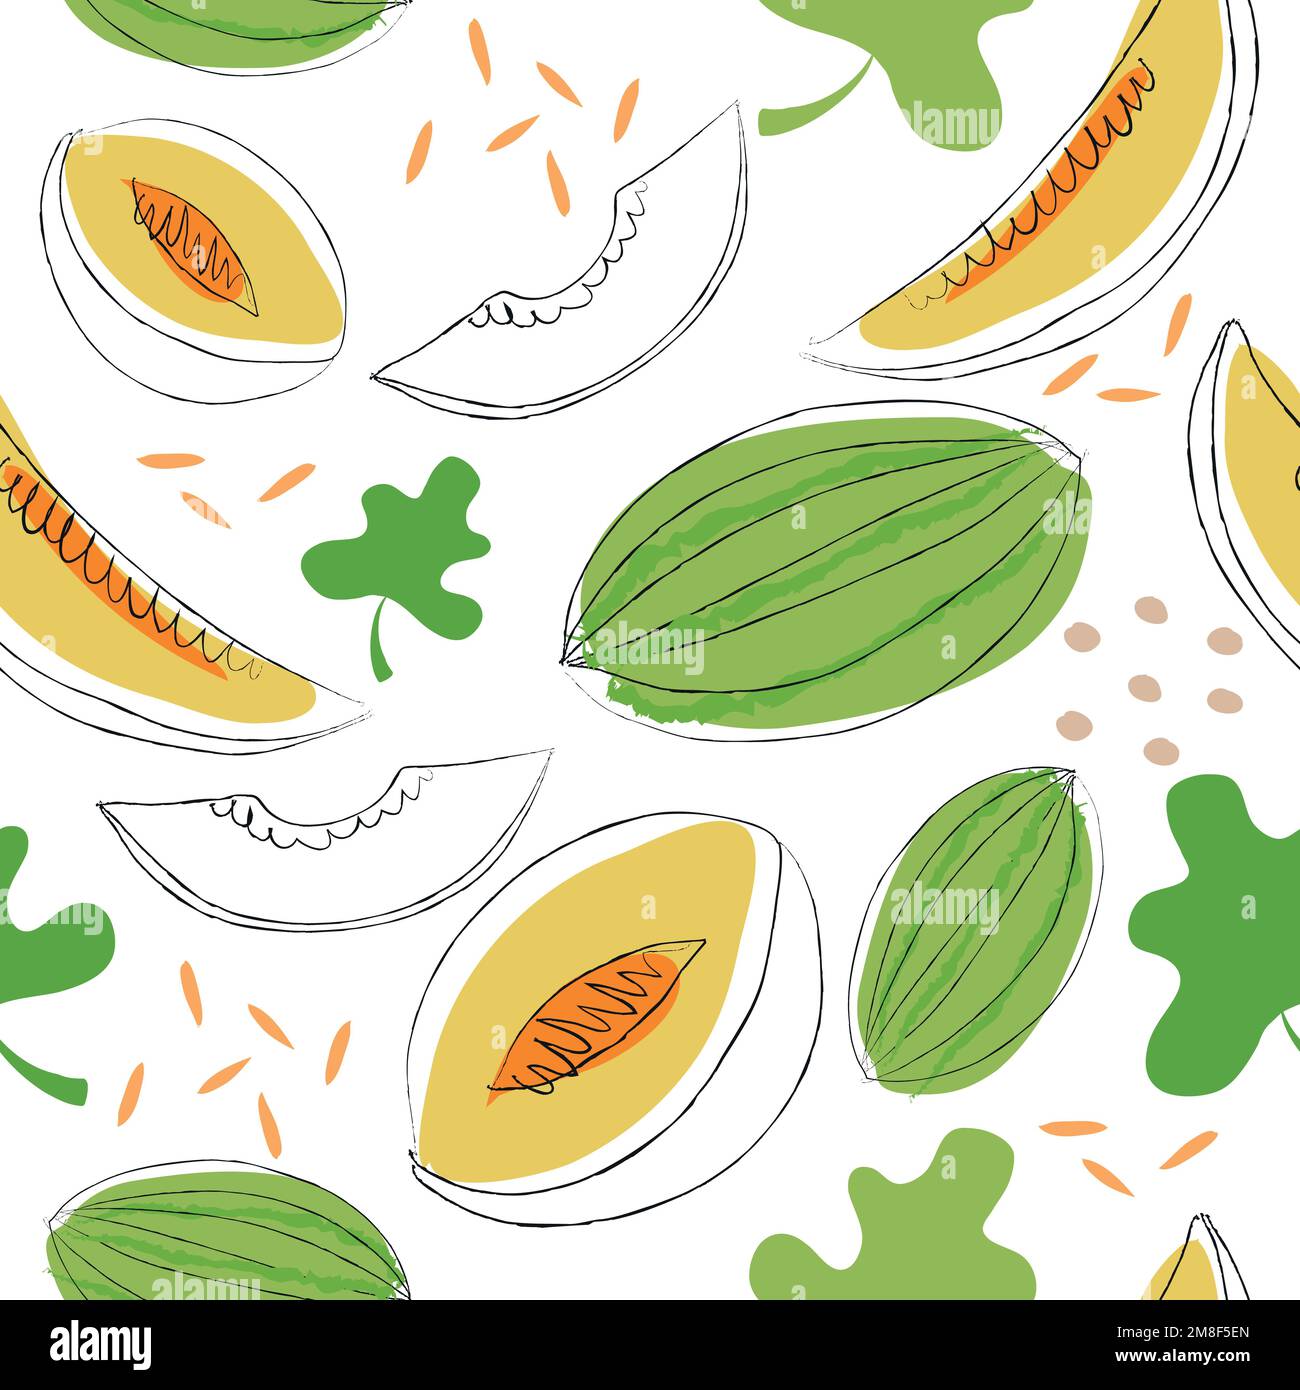 Seamless pattern on handmade abstract fruit drawings. Contemporary artistic design of melons fruit for backgrounds, cards, wrappers and wallpapers Stock Vector